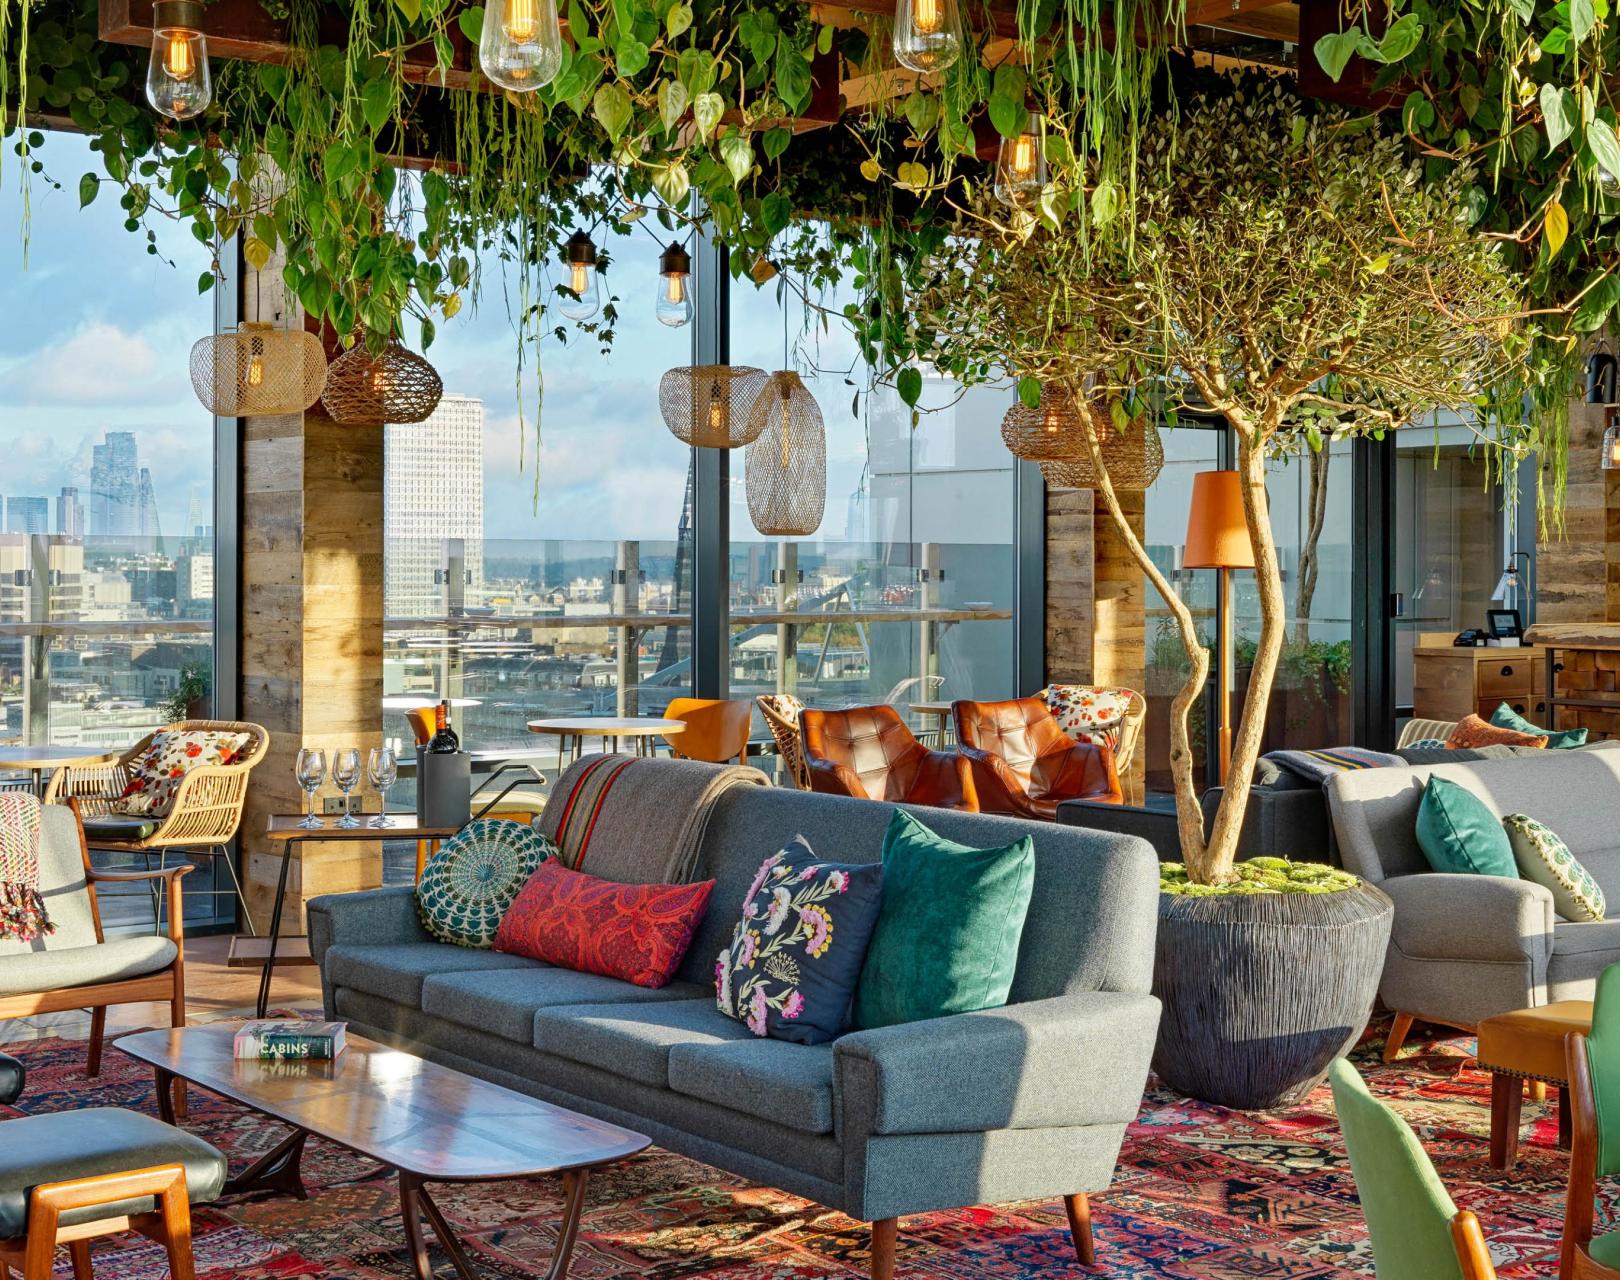 Treehouse London launches ‘safari style supper’ perched high above Regent Street